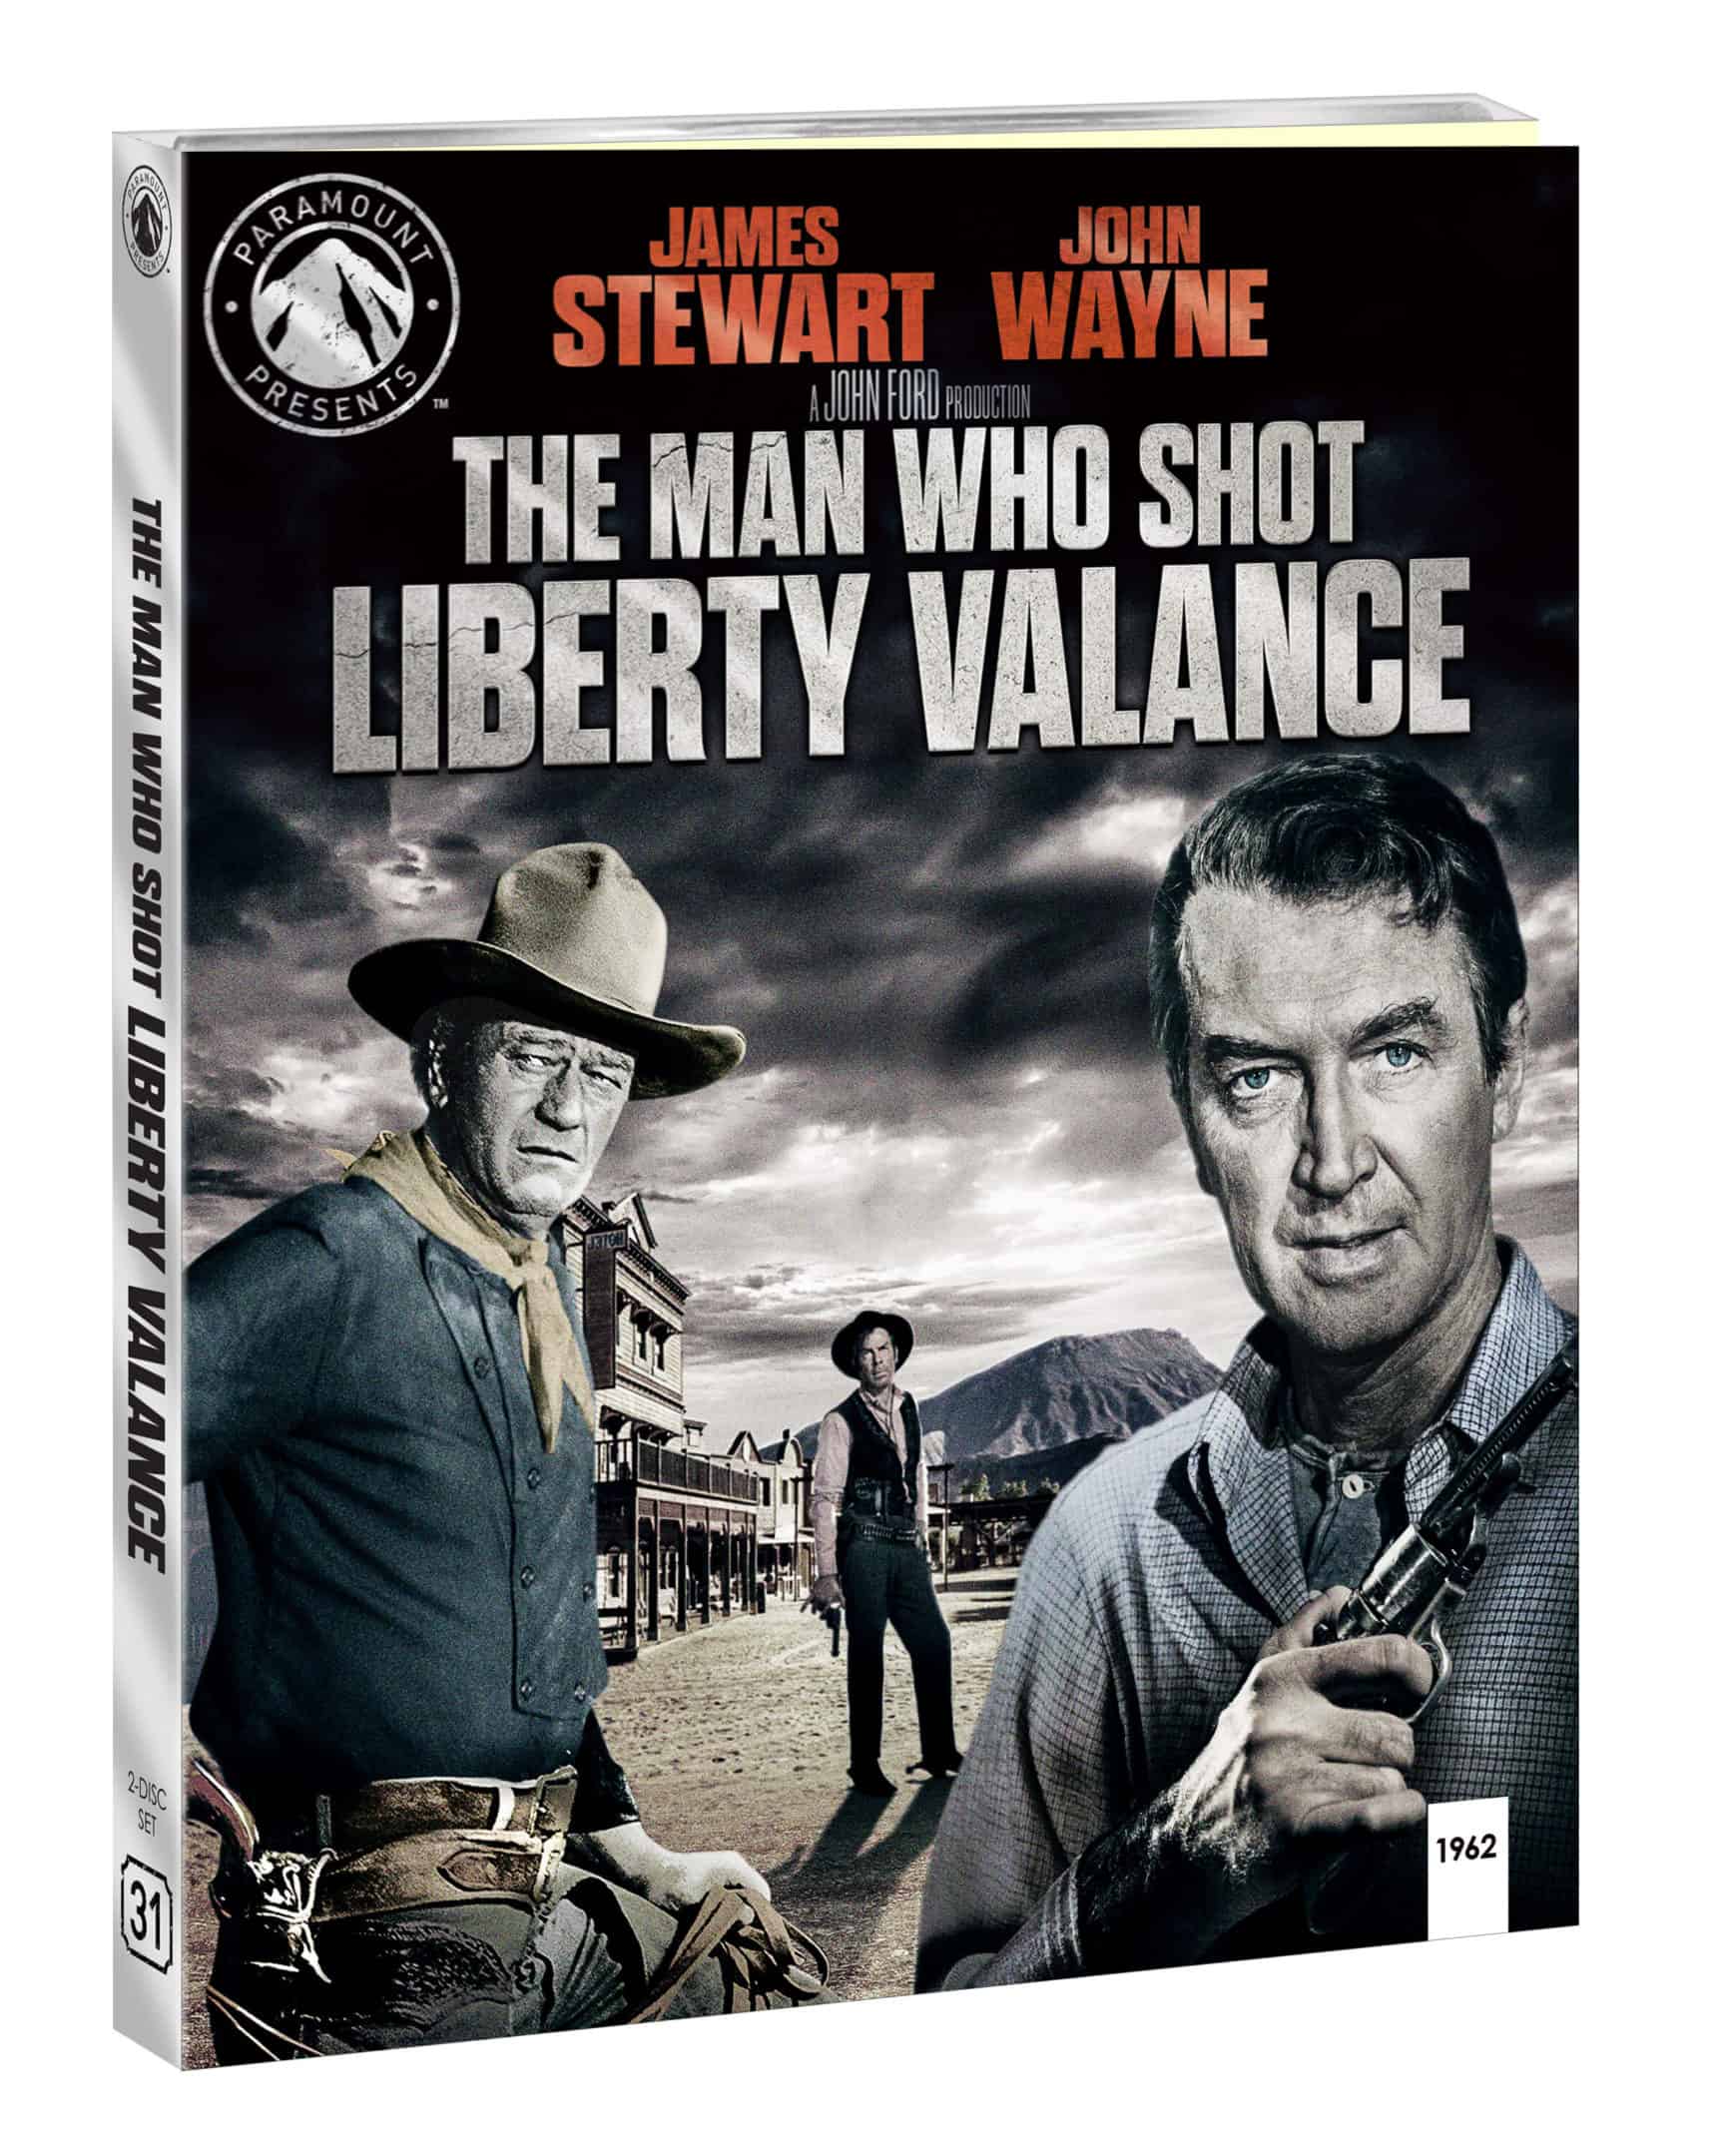 The Man Who Shot Liberty Valence comes to 4K UHD on May 17th 2